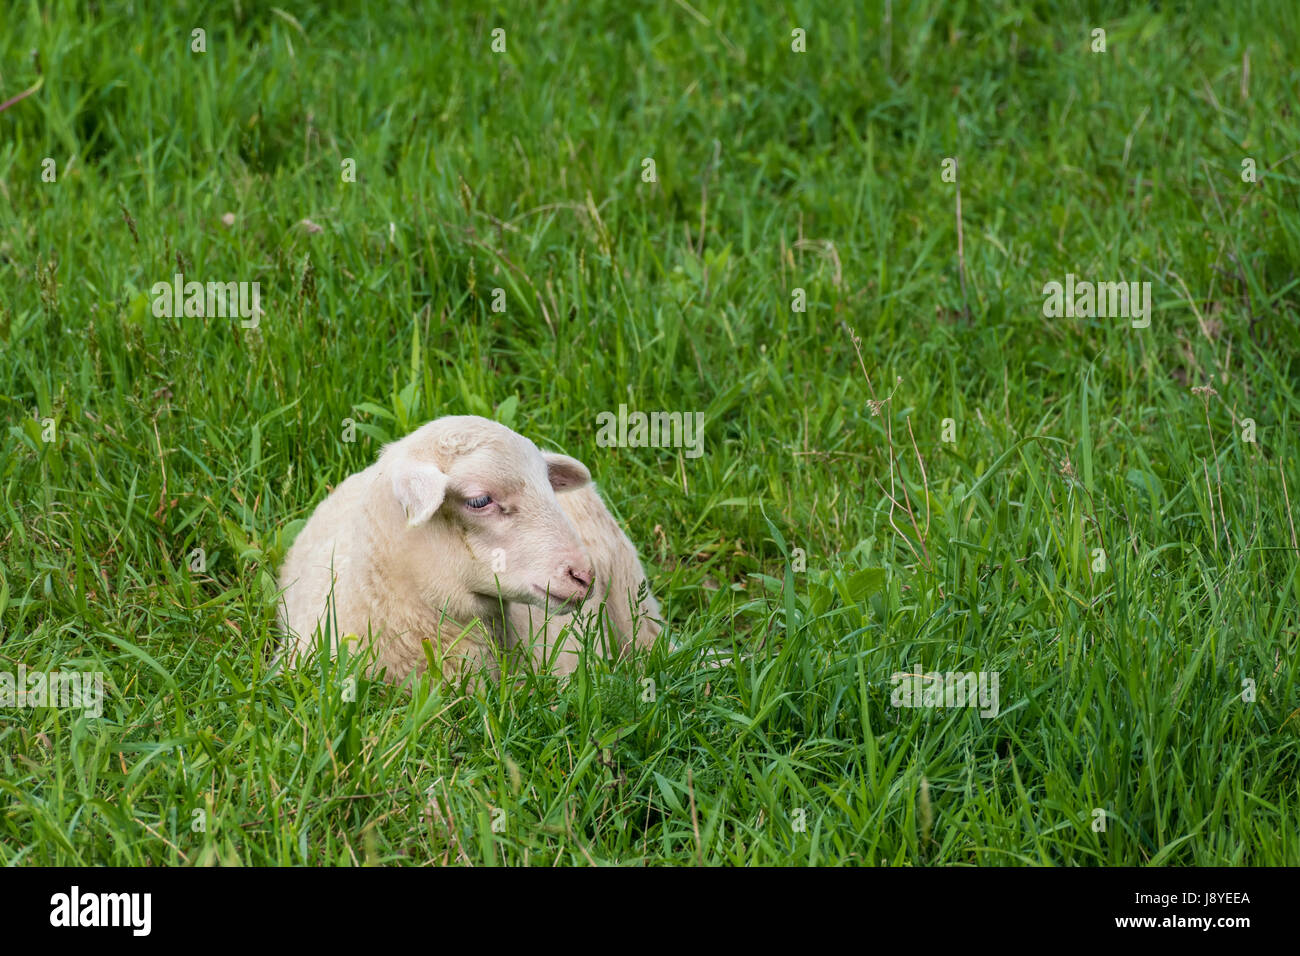 white lamb lies in the grass (meadow) Stock Photo